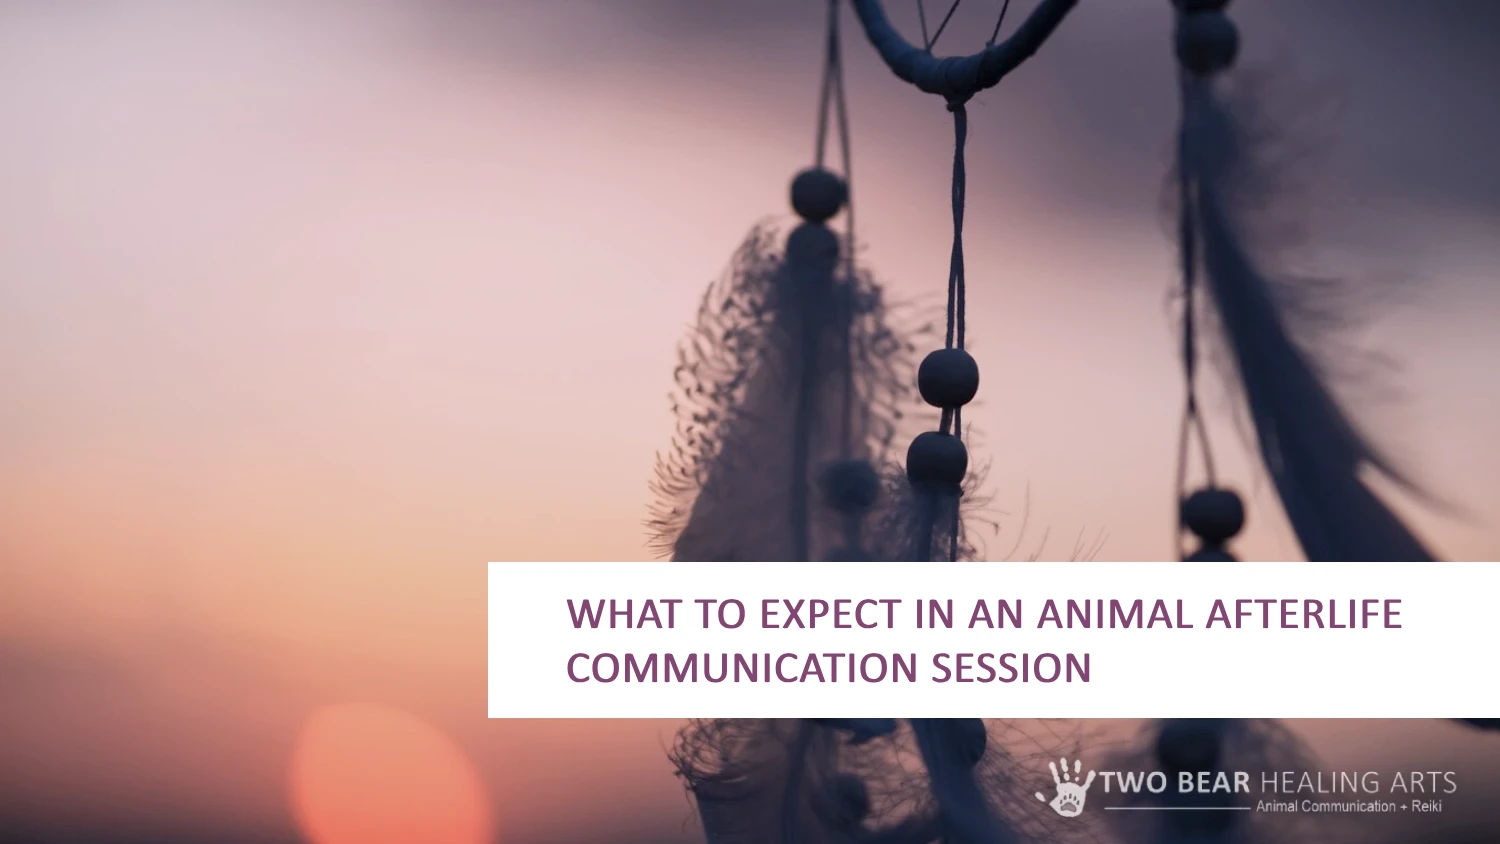 Wondering what an animal afterlife communication session is like? Image of a dreamcatcher symbolizes the potential for peaceful and insightful connections with your departed pet.